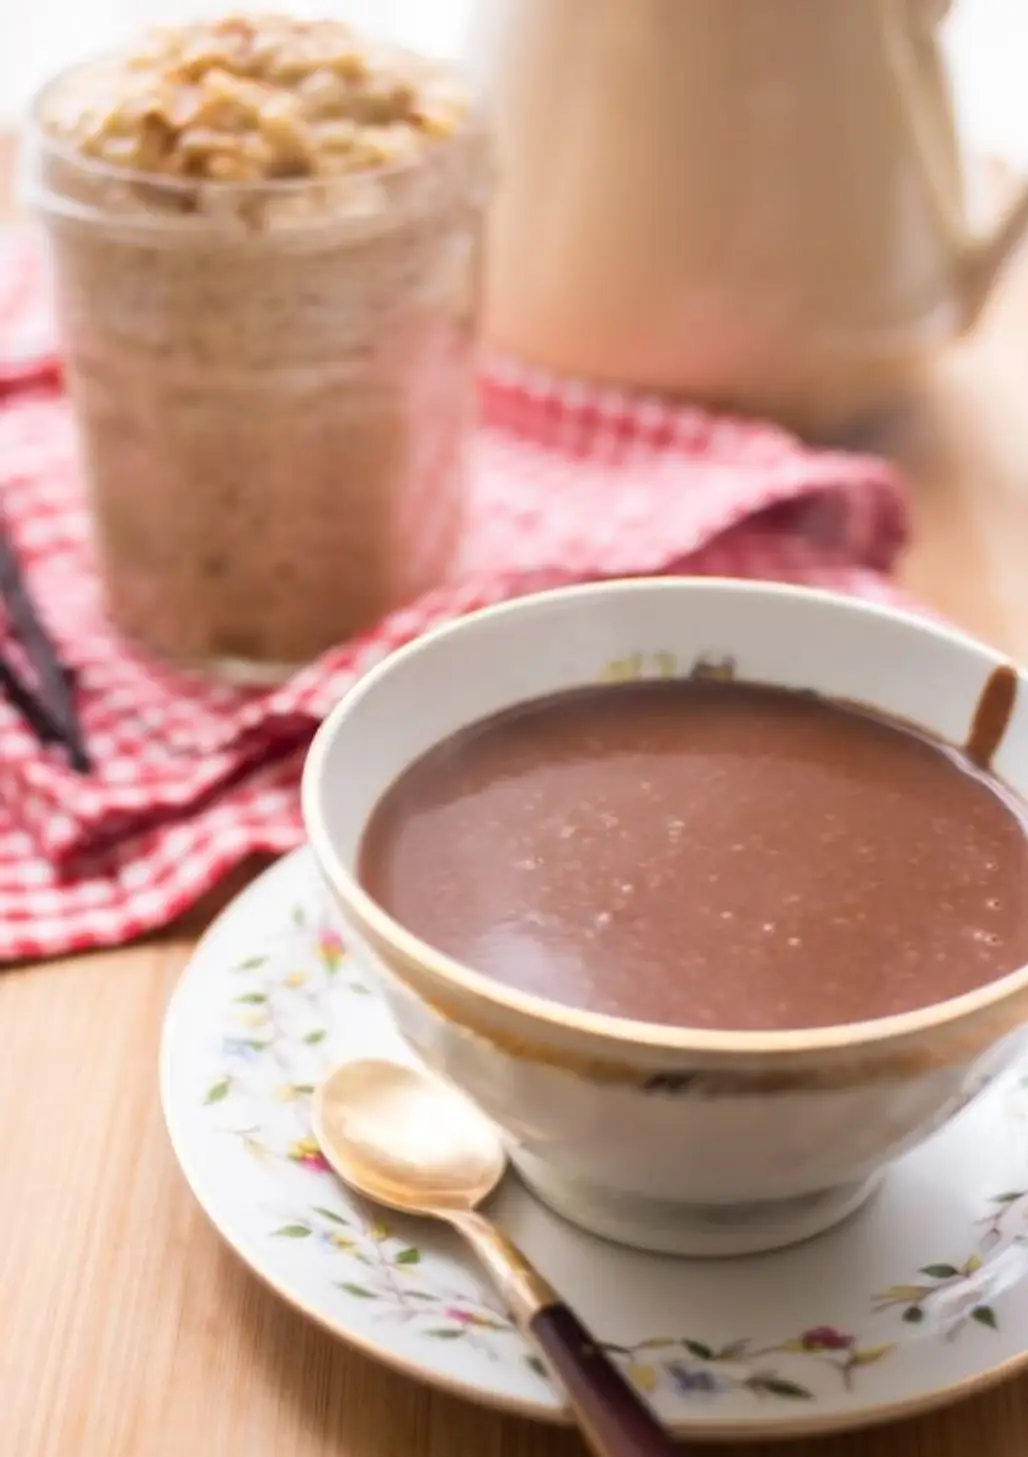 Use Almond Milk and Raw Cacao for a Nutritious Vegan Hot Chocolate